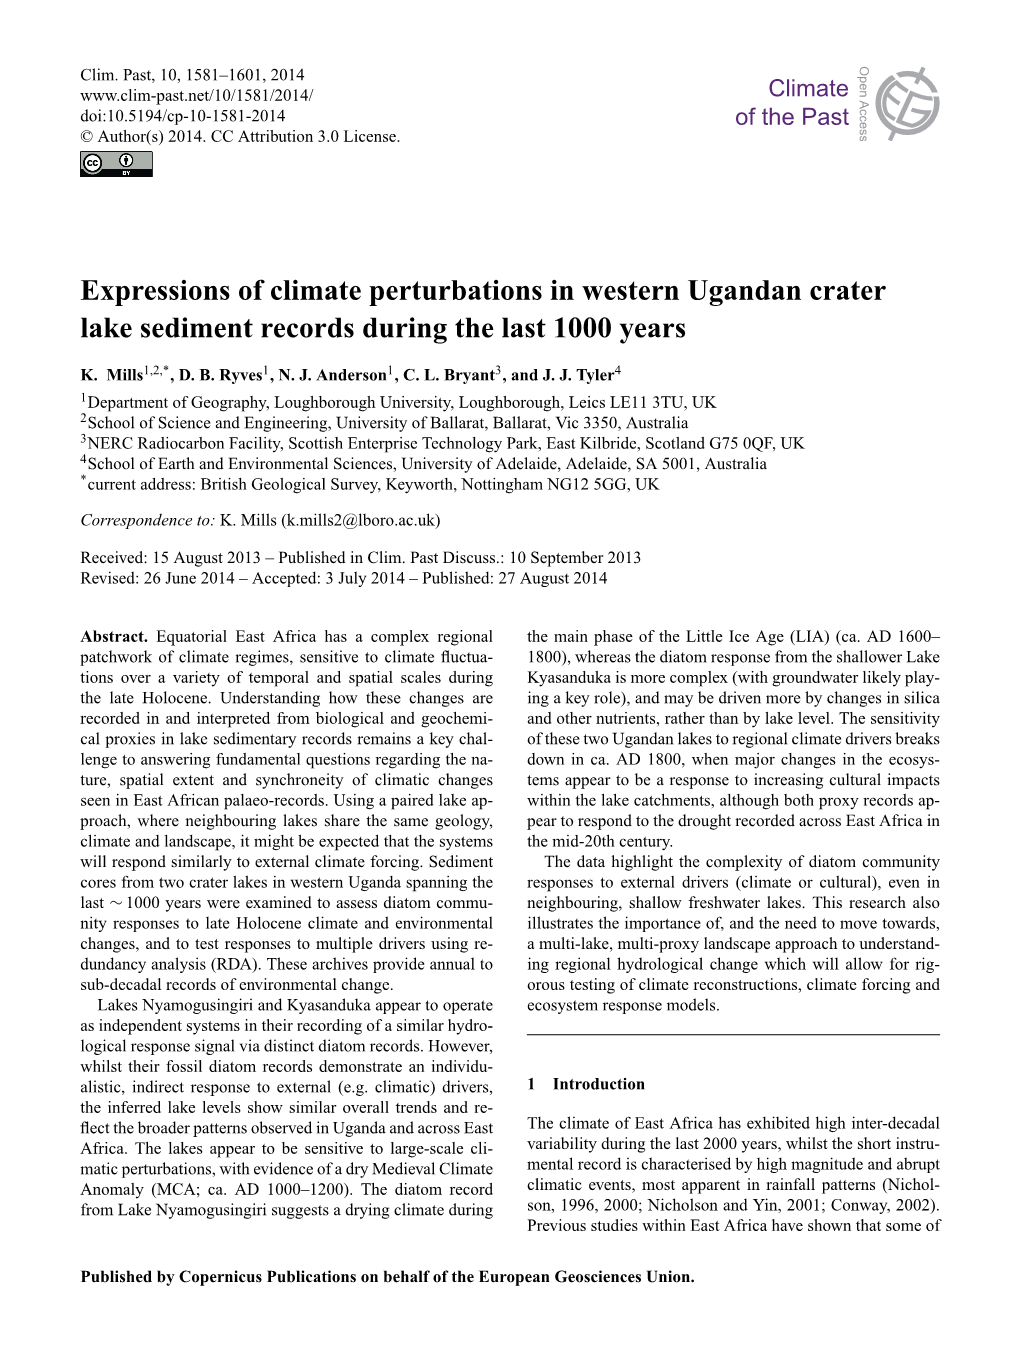 Expressions of Climate Perturbations in Western Ugandan Crater Lake Sediment Records During the Last 1000 Years